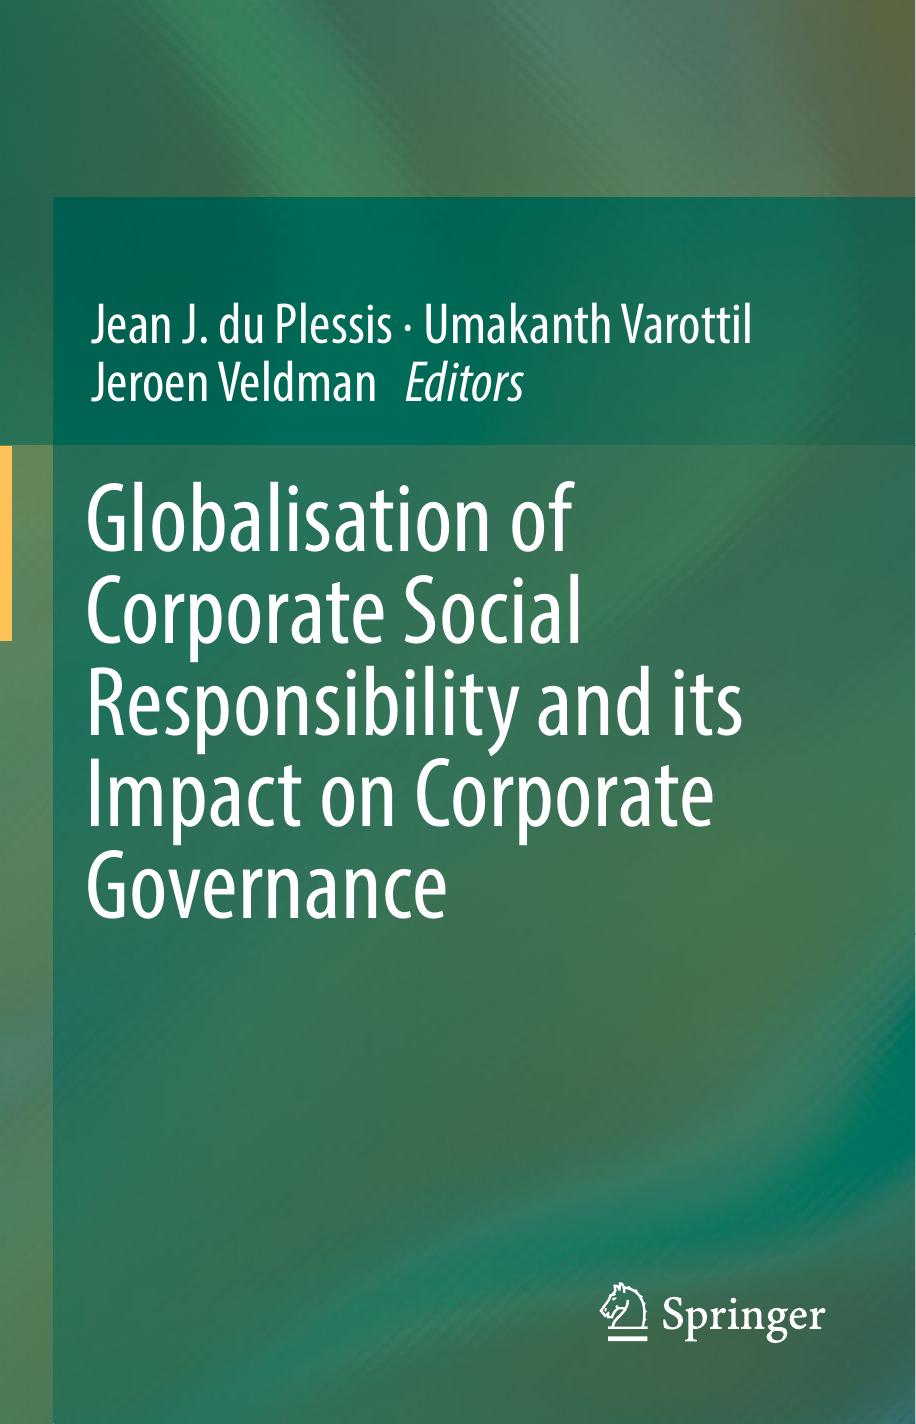 Globalisation of Corporate Social Responsibility and its Impact on Corporate Governance 2018